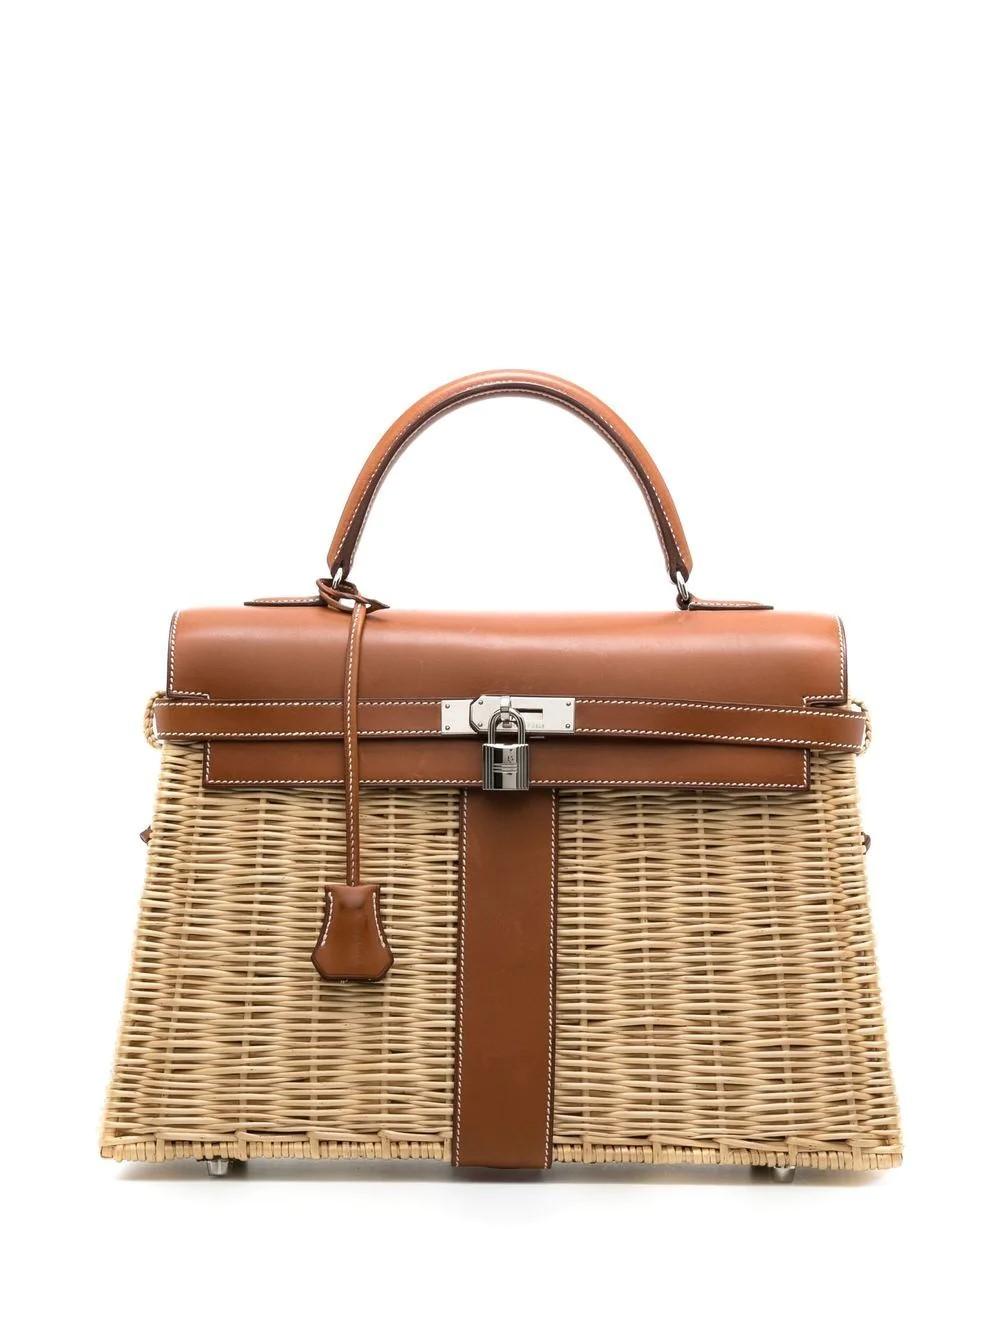 Limited Edition Hermes Picnic Kelly 35 For Sale 2